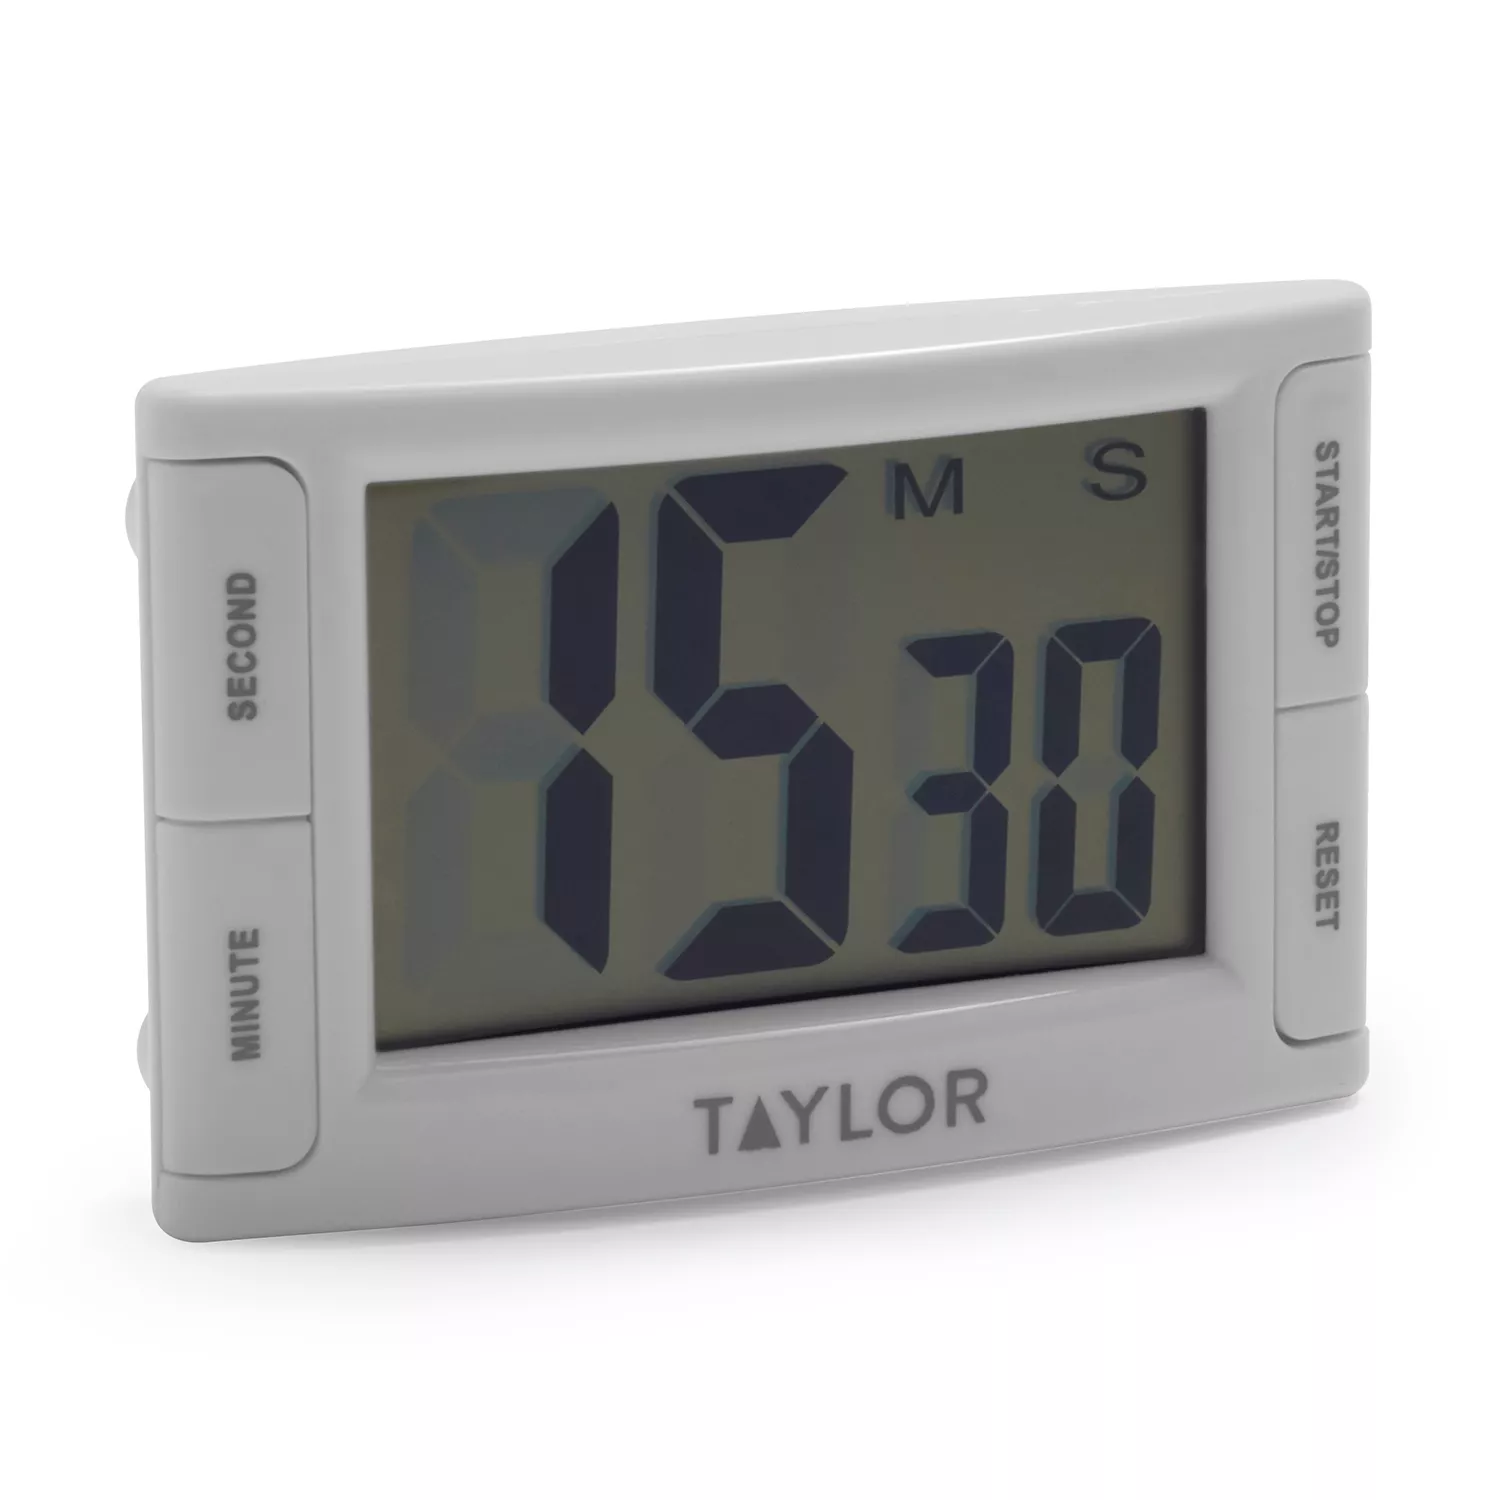 Extra Big & Loud Timer - for Noisy Commercial Kitchens!